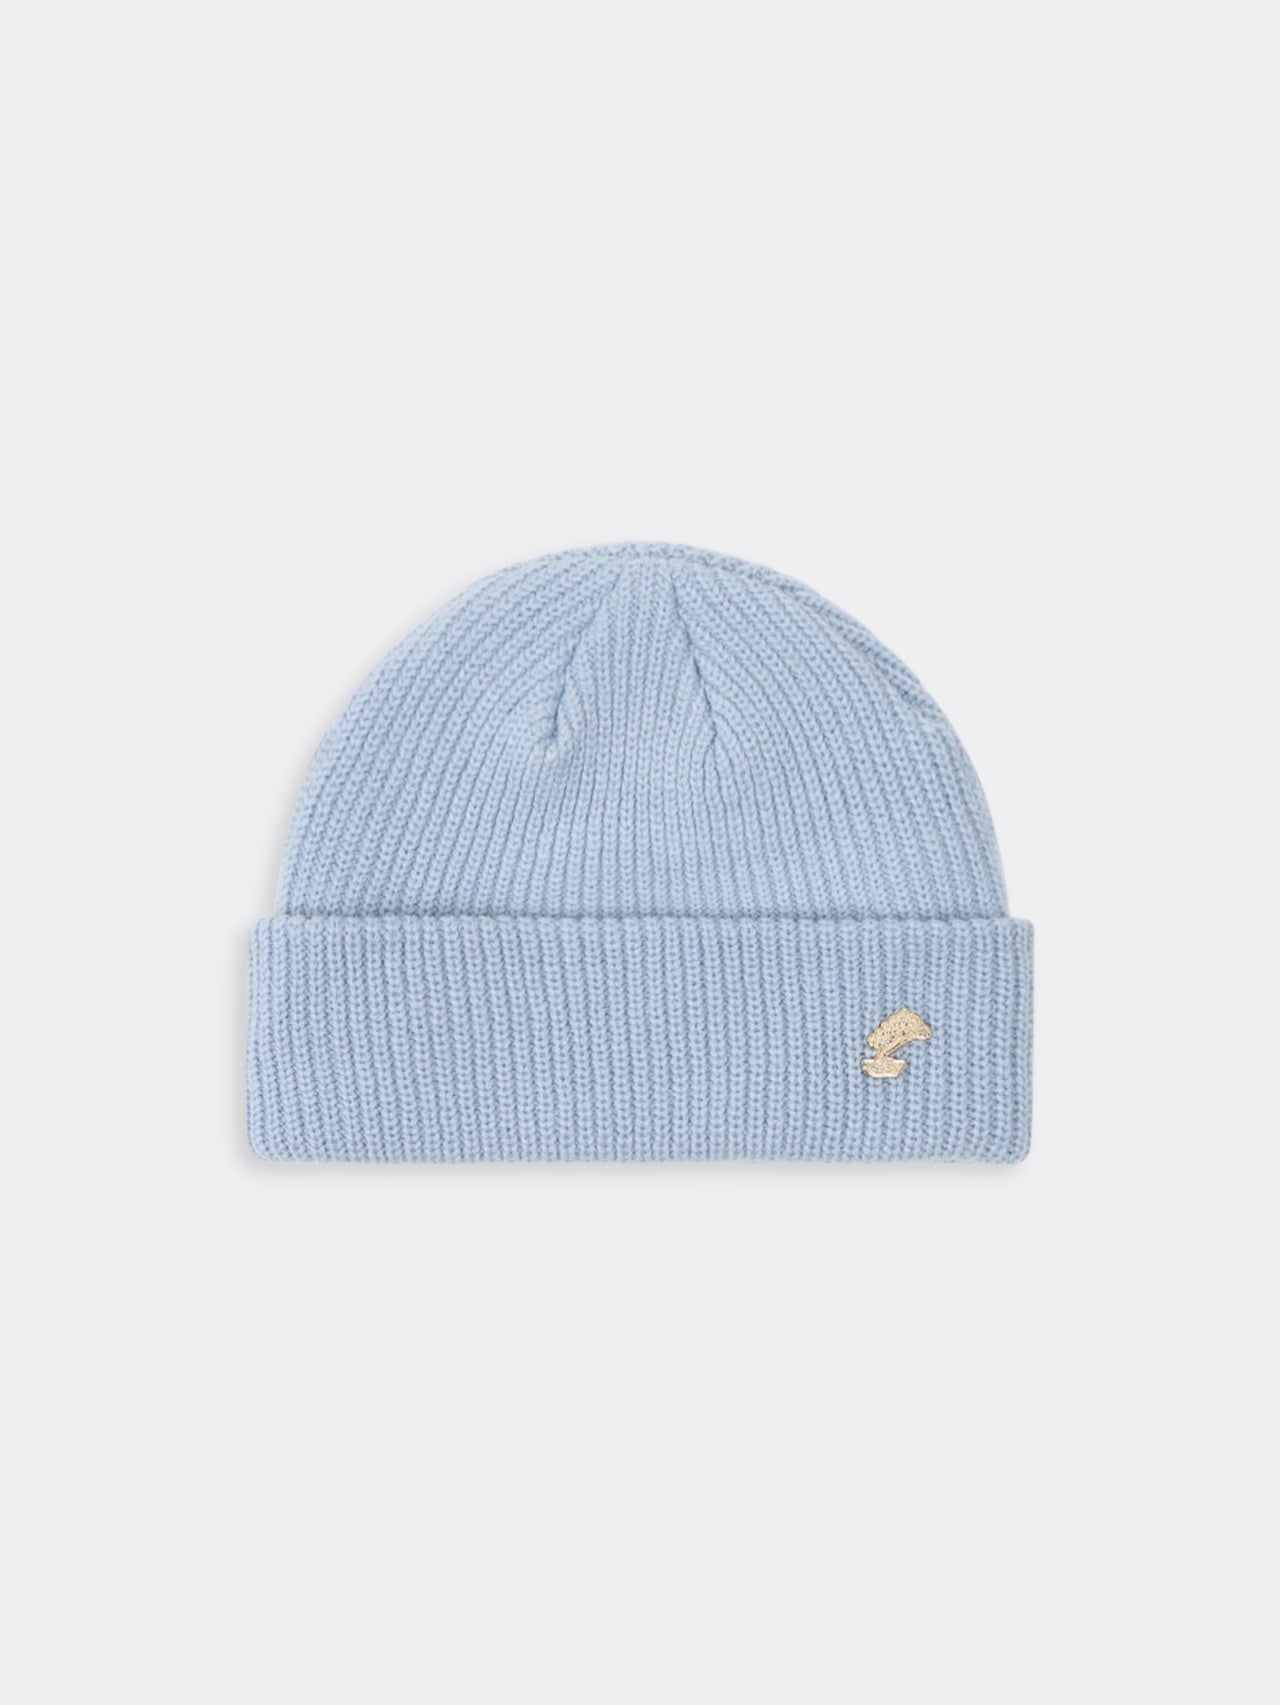 CABLE KNIT BEANIE - POWDER